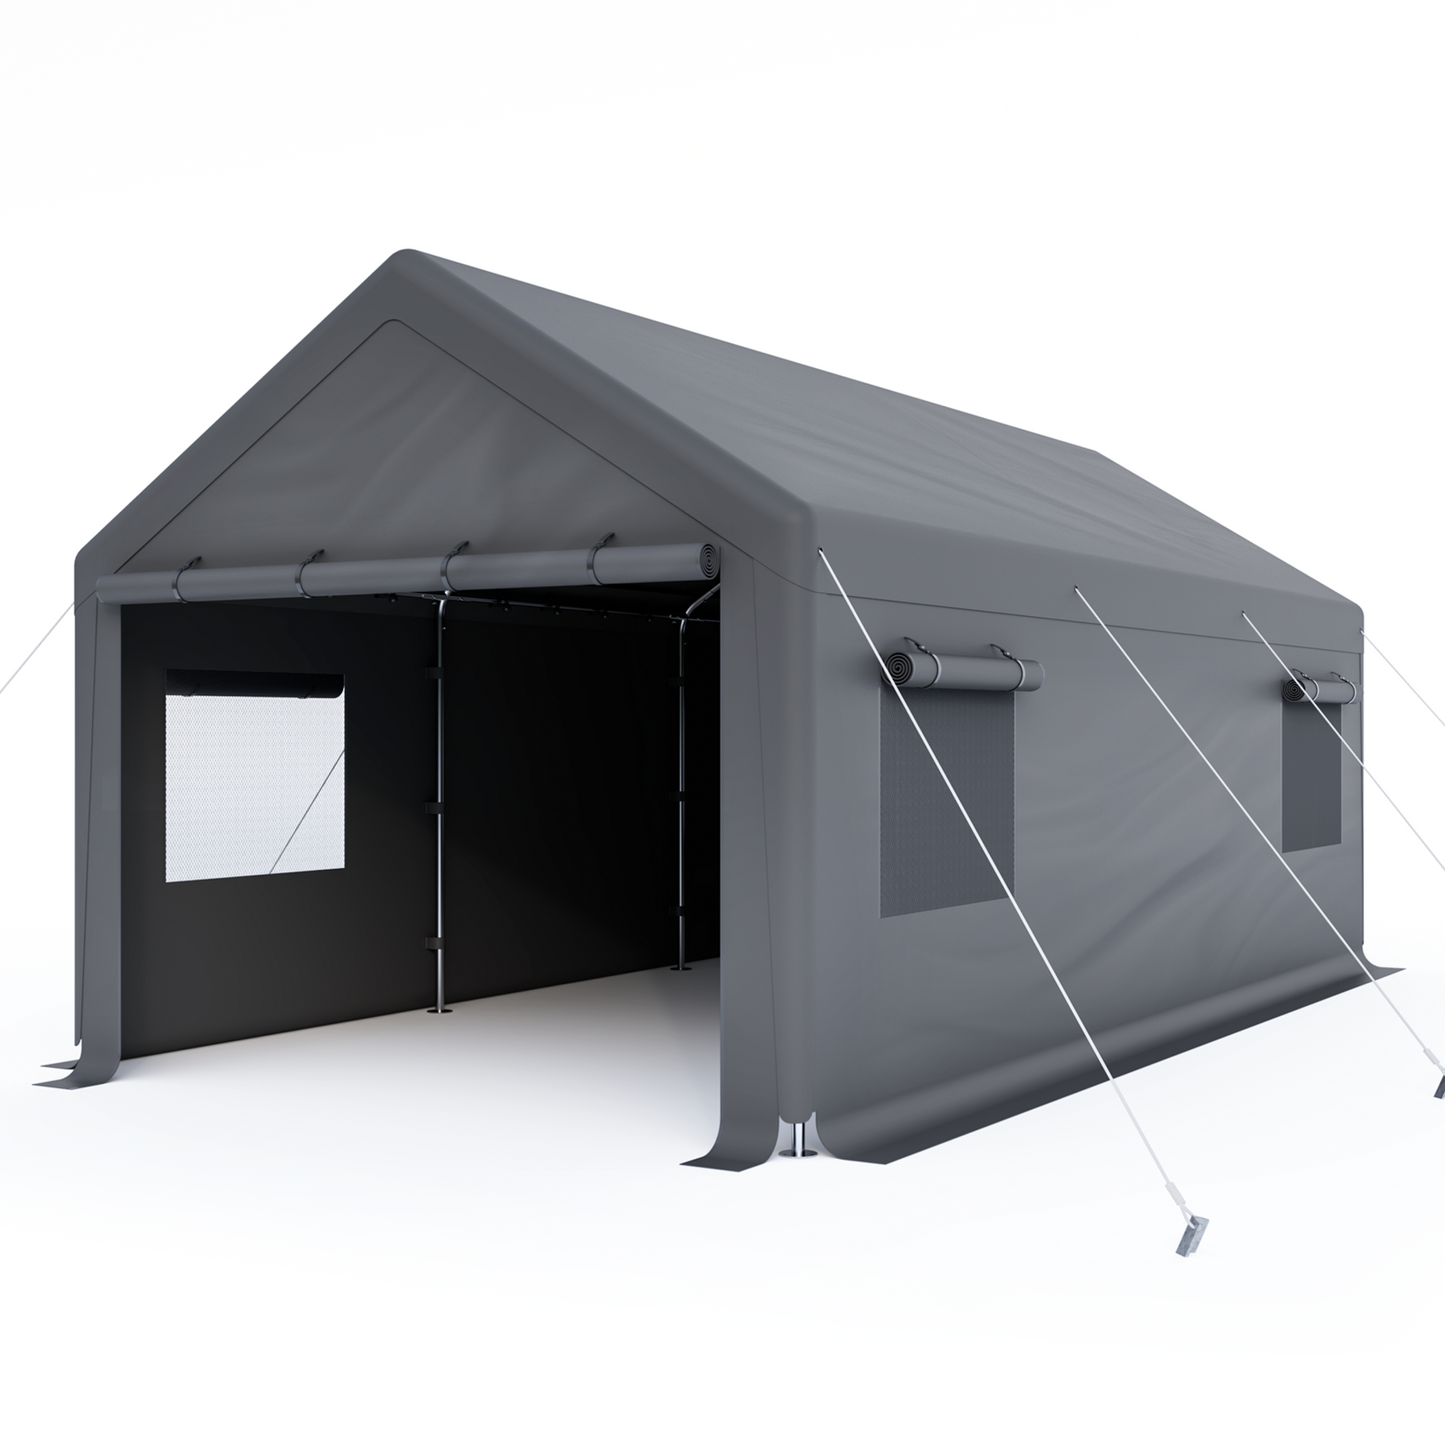 Cecarol 12x20x9FT Carport with 200G PE All Weather Tarp and 4 Air Permeability Windows (Gray)